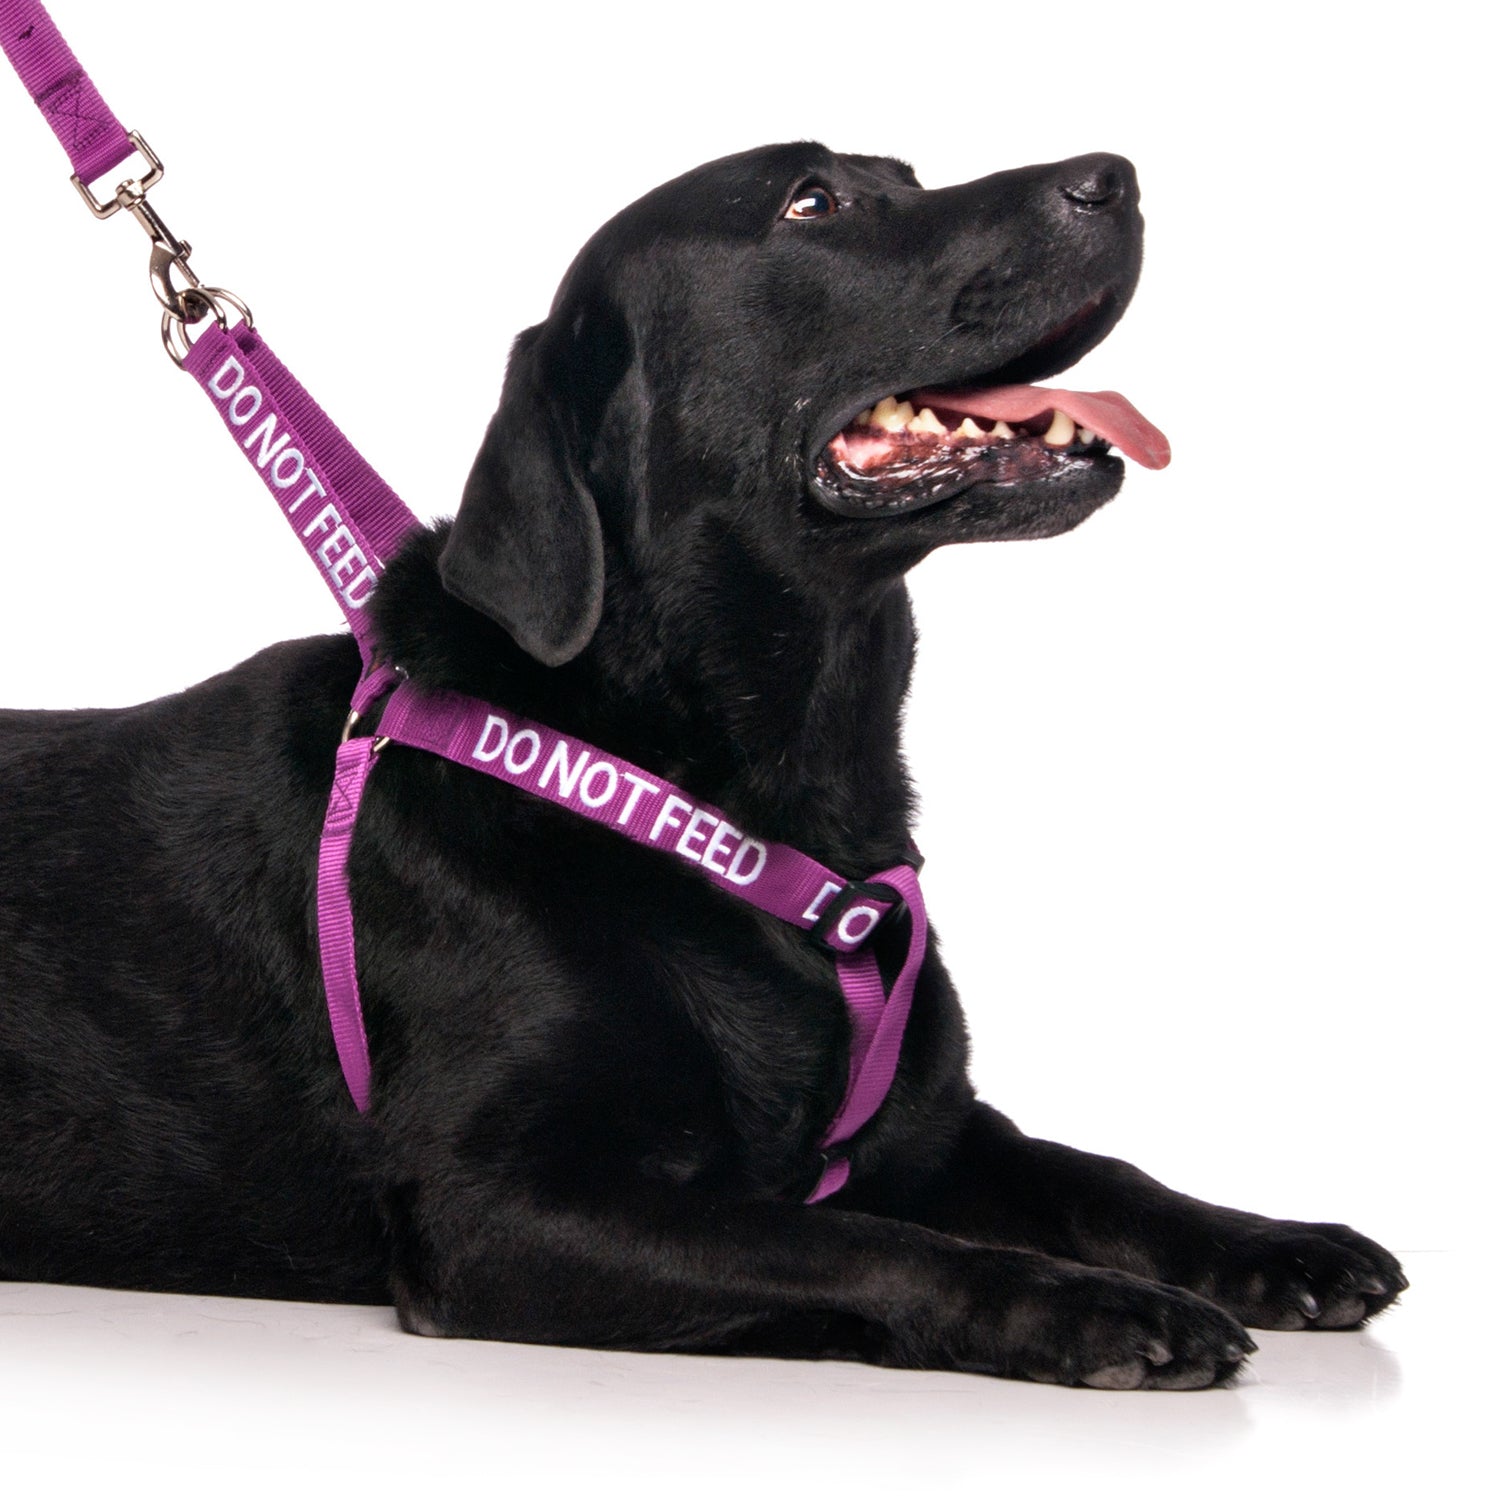 Dexil Friendly Dog Collars DO NOT FEED L/XL Strap Harness